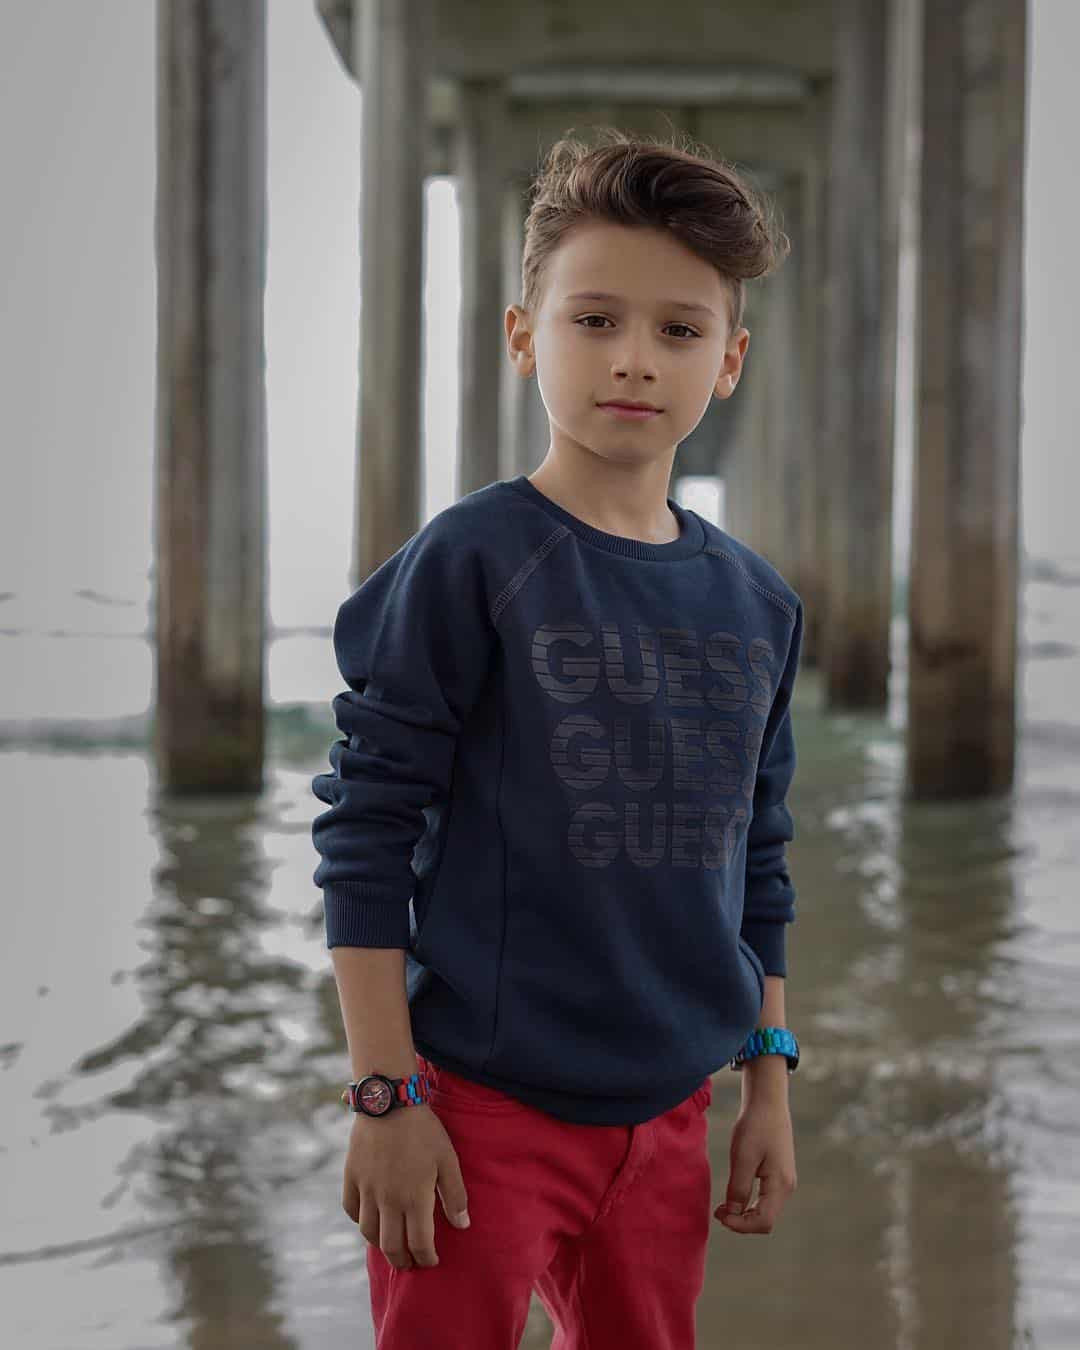 Kids Fashion Trends 2020
 Top 8 Trends of Boys Fashion 2020 Best ideas for Kids